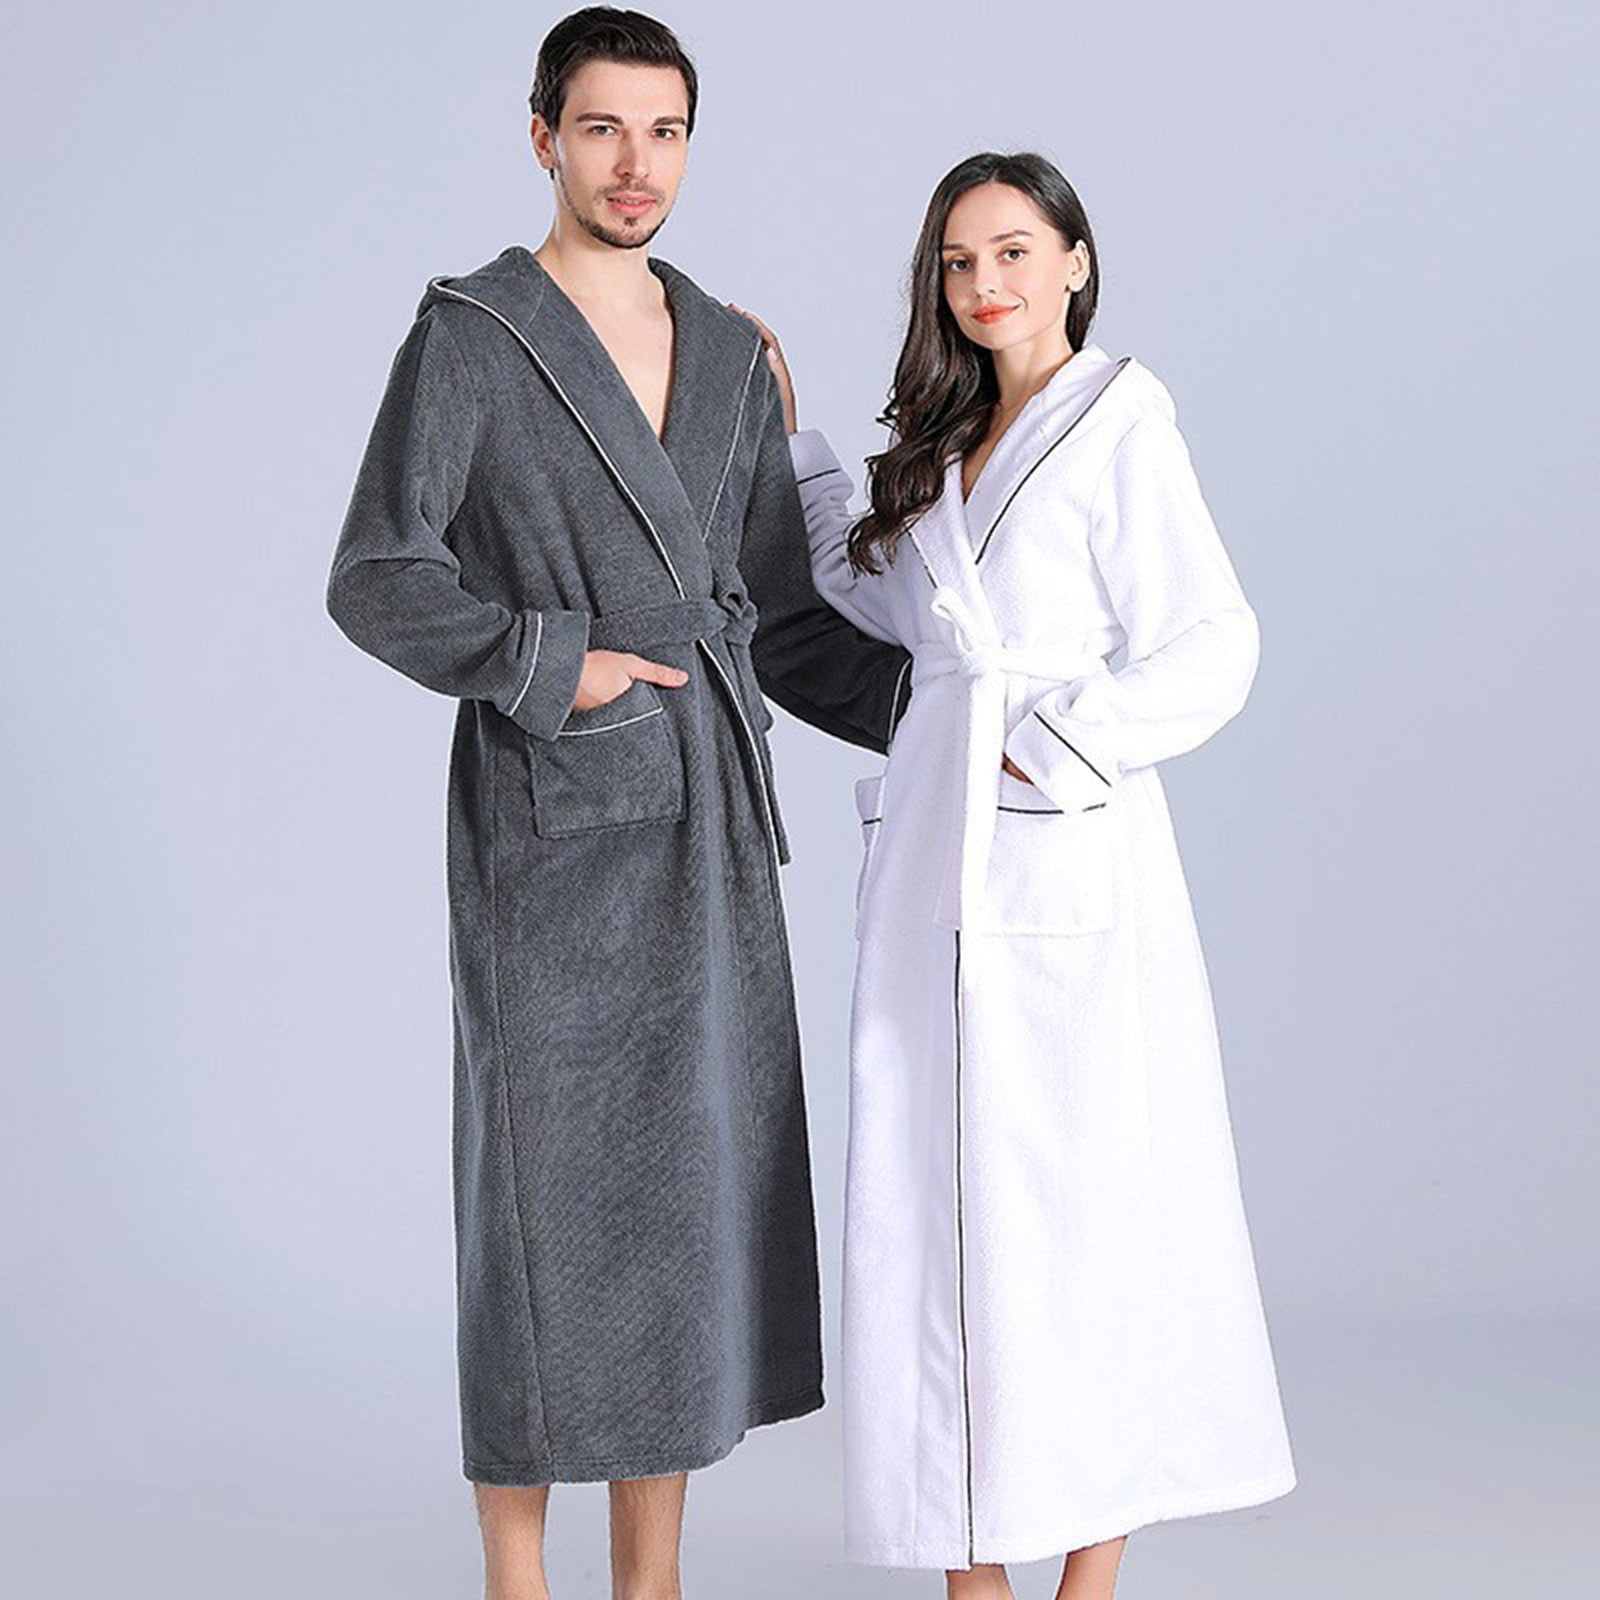 Pin by Florian de Vries on Bathrobes And things | Bath robes for women,  Flannel women, Gowns dresses